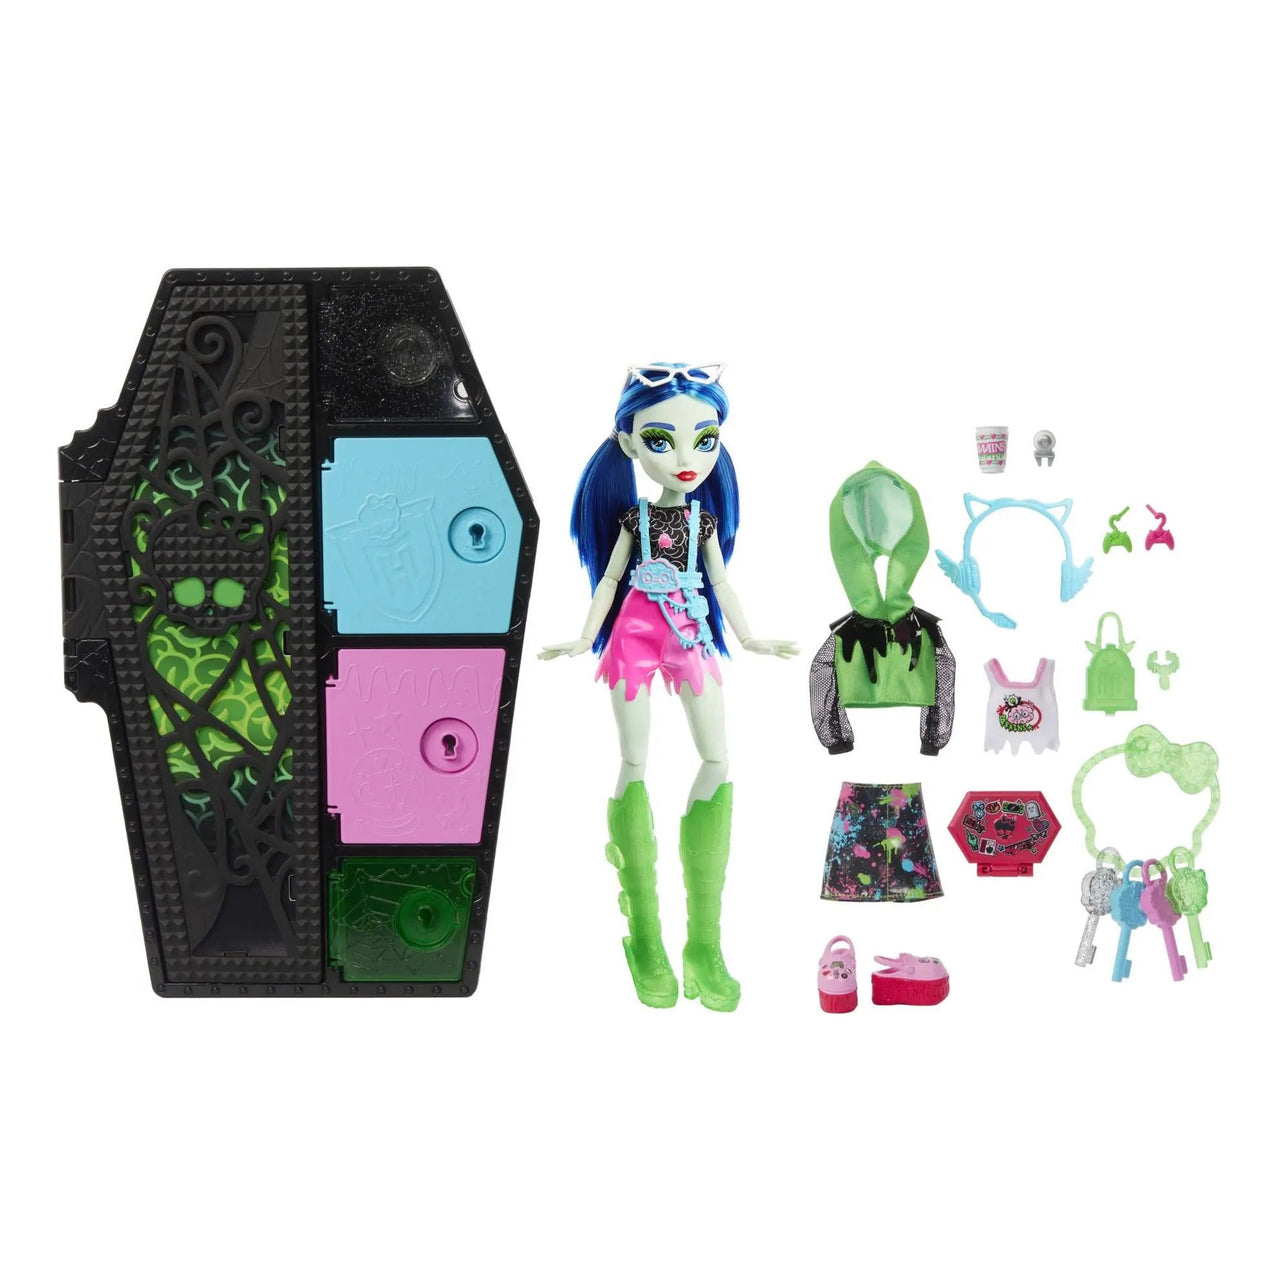 Monster High Skulltimate Secrets Neon Frights Series 3 Ghoulia Yelps Doll most